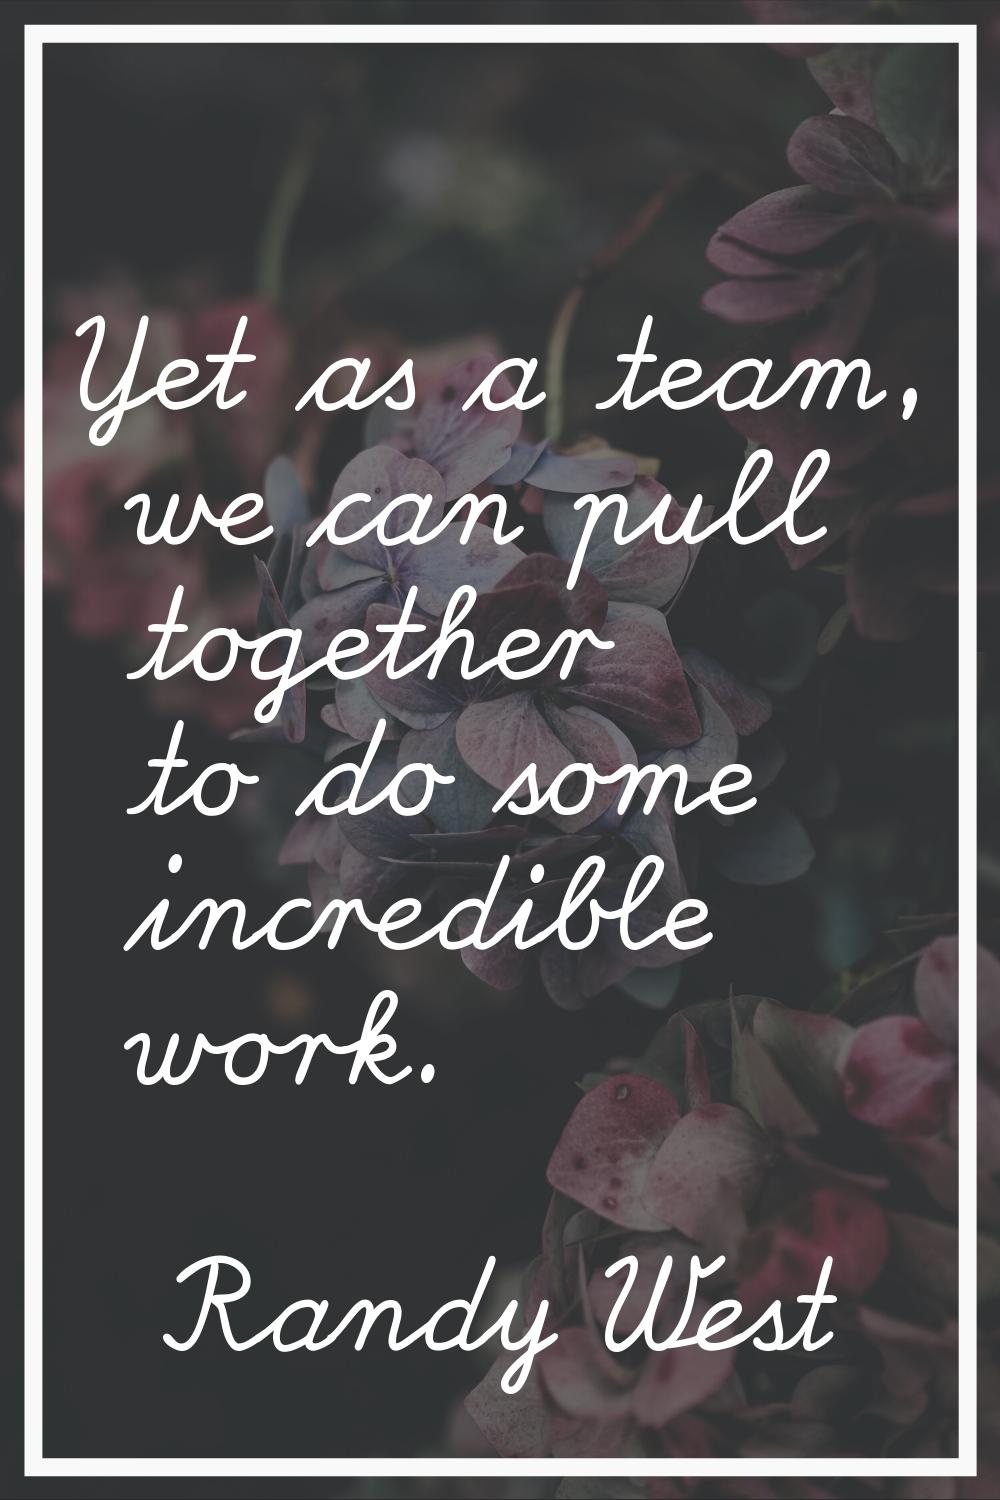 Yet as a team, we can pull together to do some incredible work.